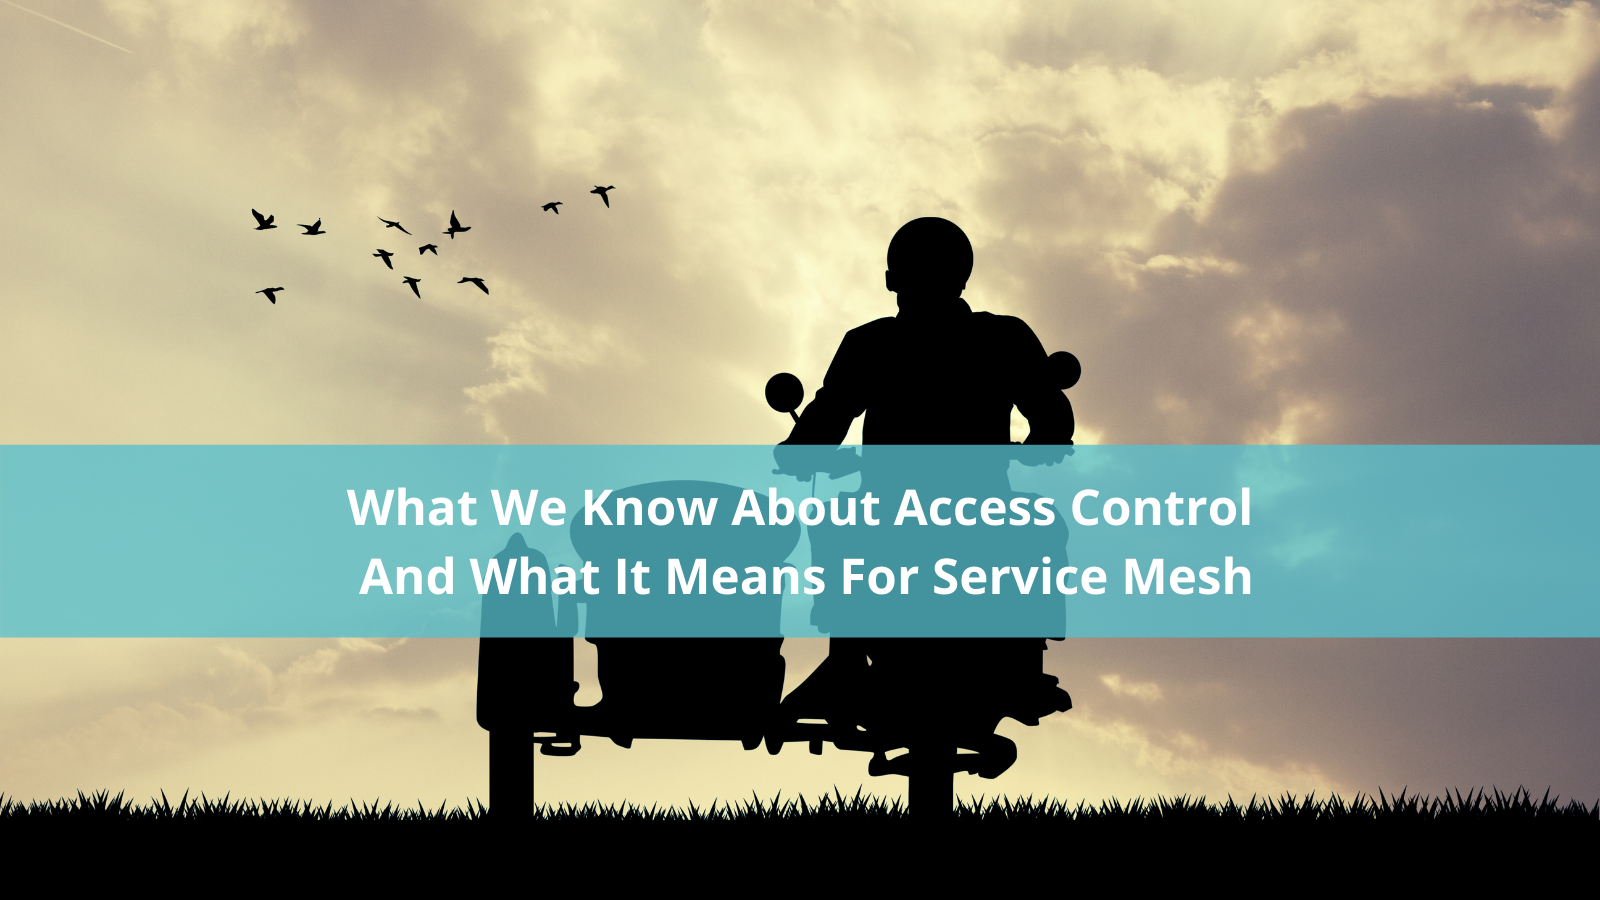 What we know about access control and what it means for service mesh